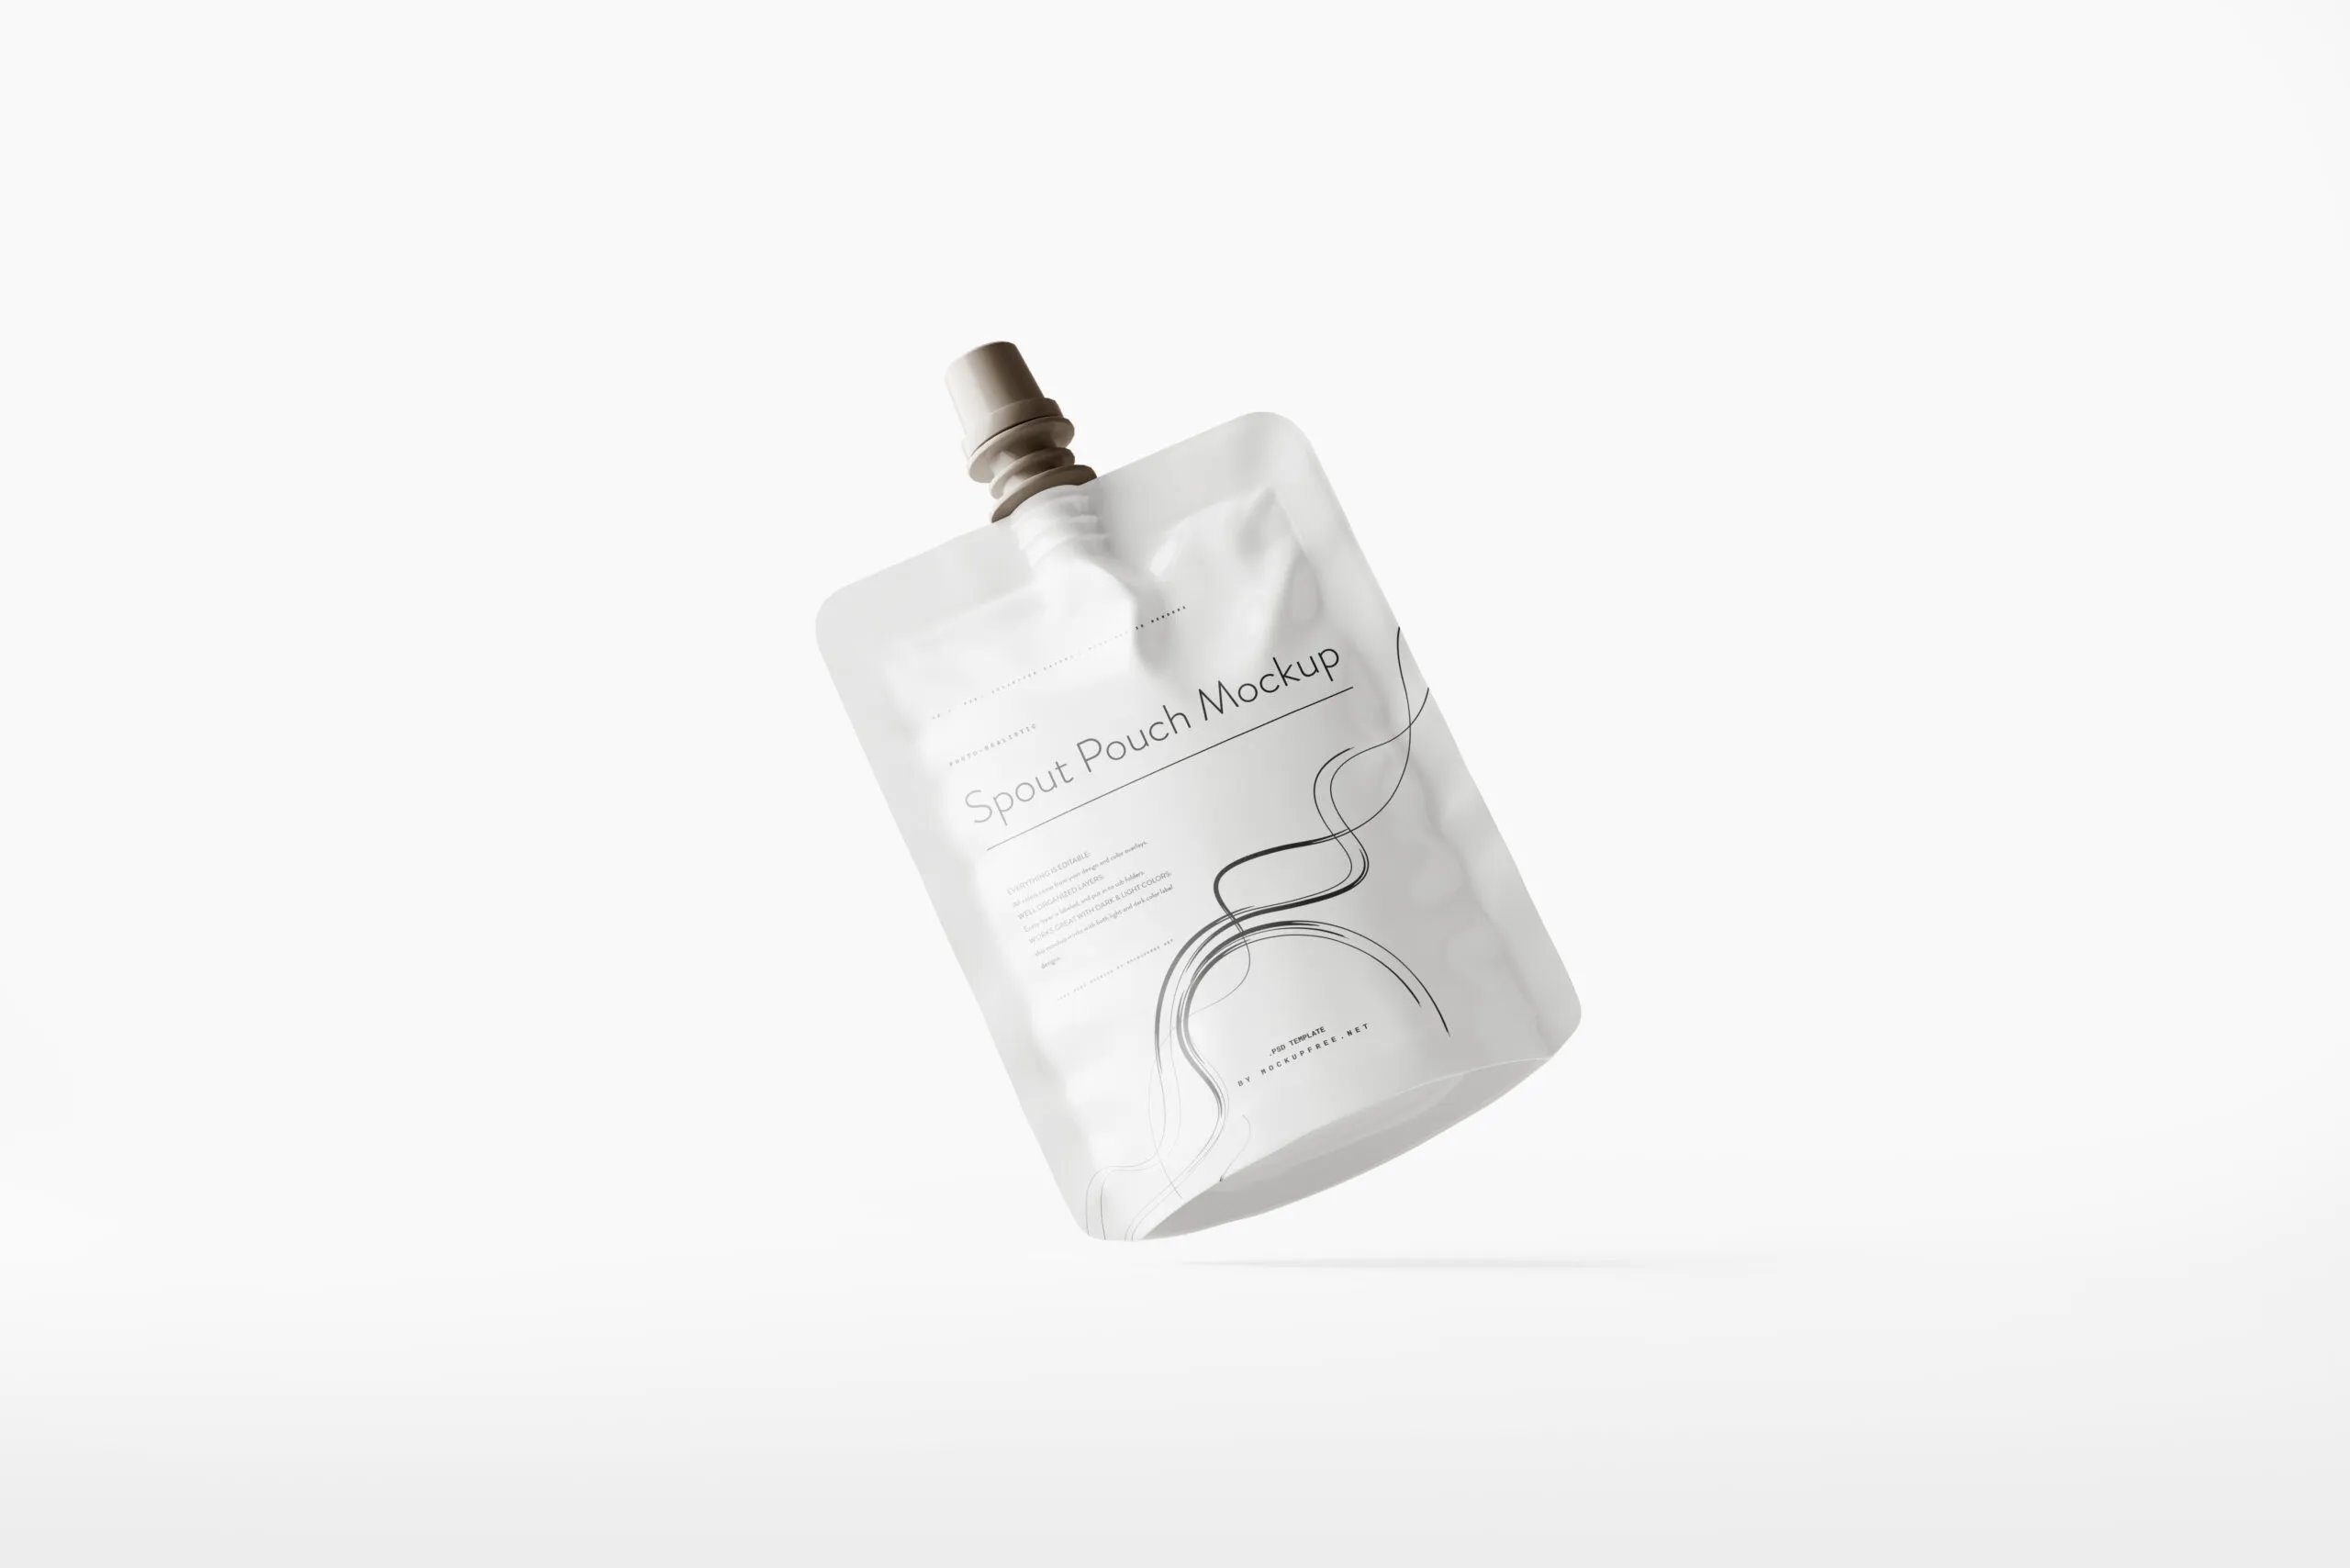 5 Mockups of Liquid Spout Pouch in Different Shots FREE PSD